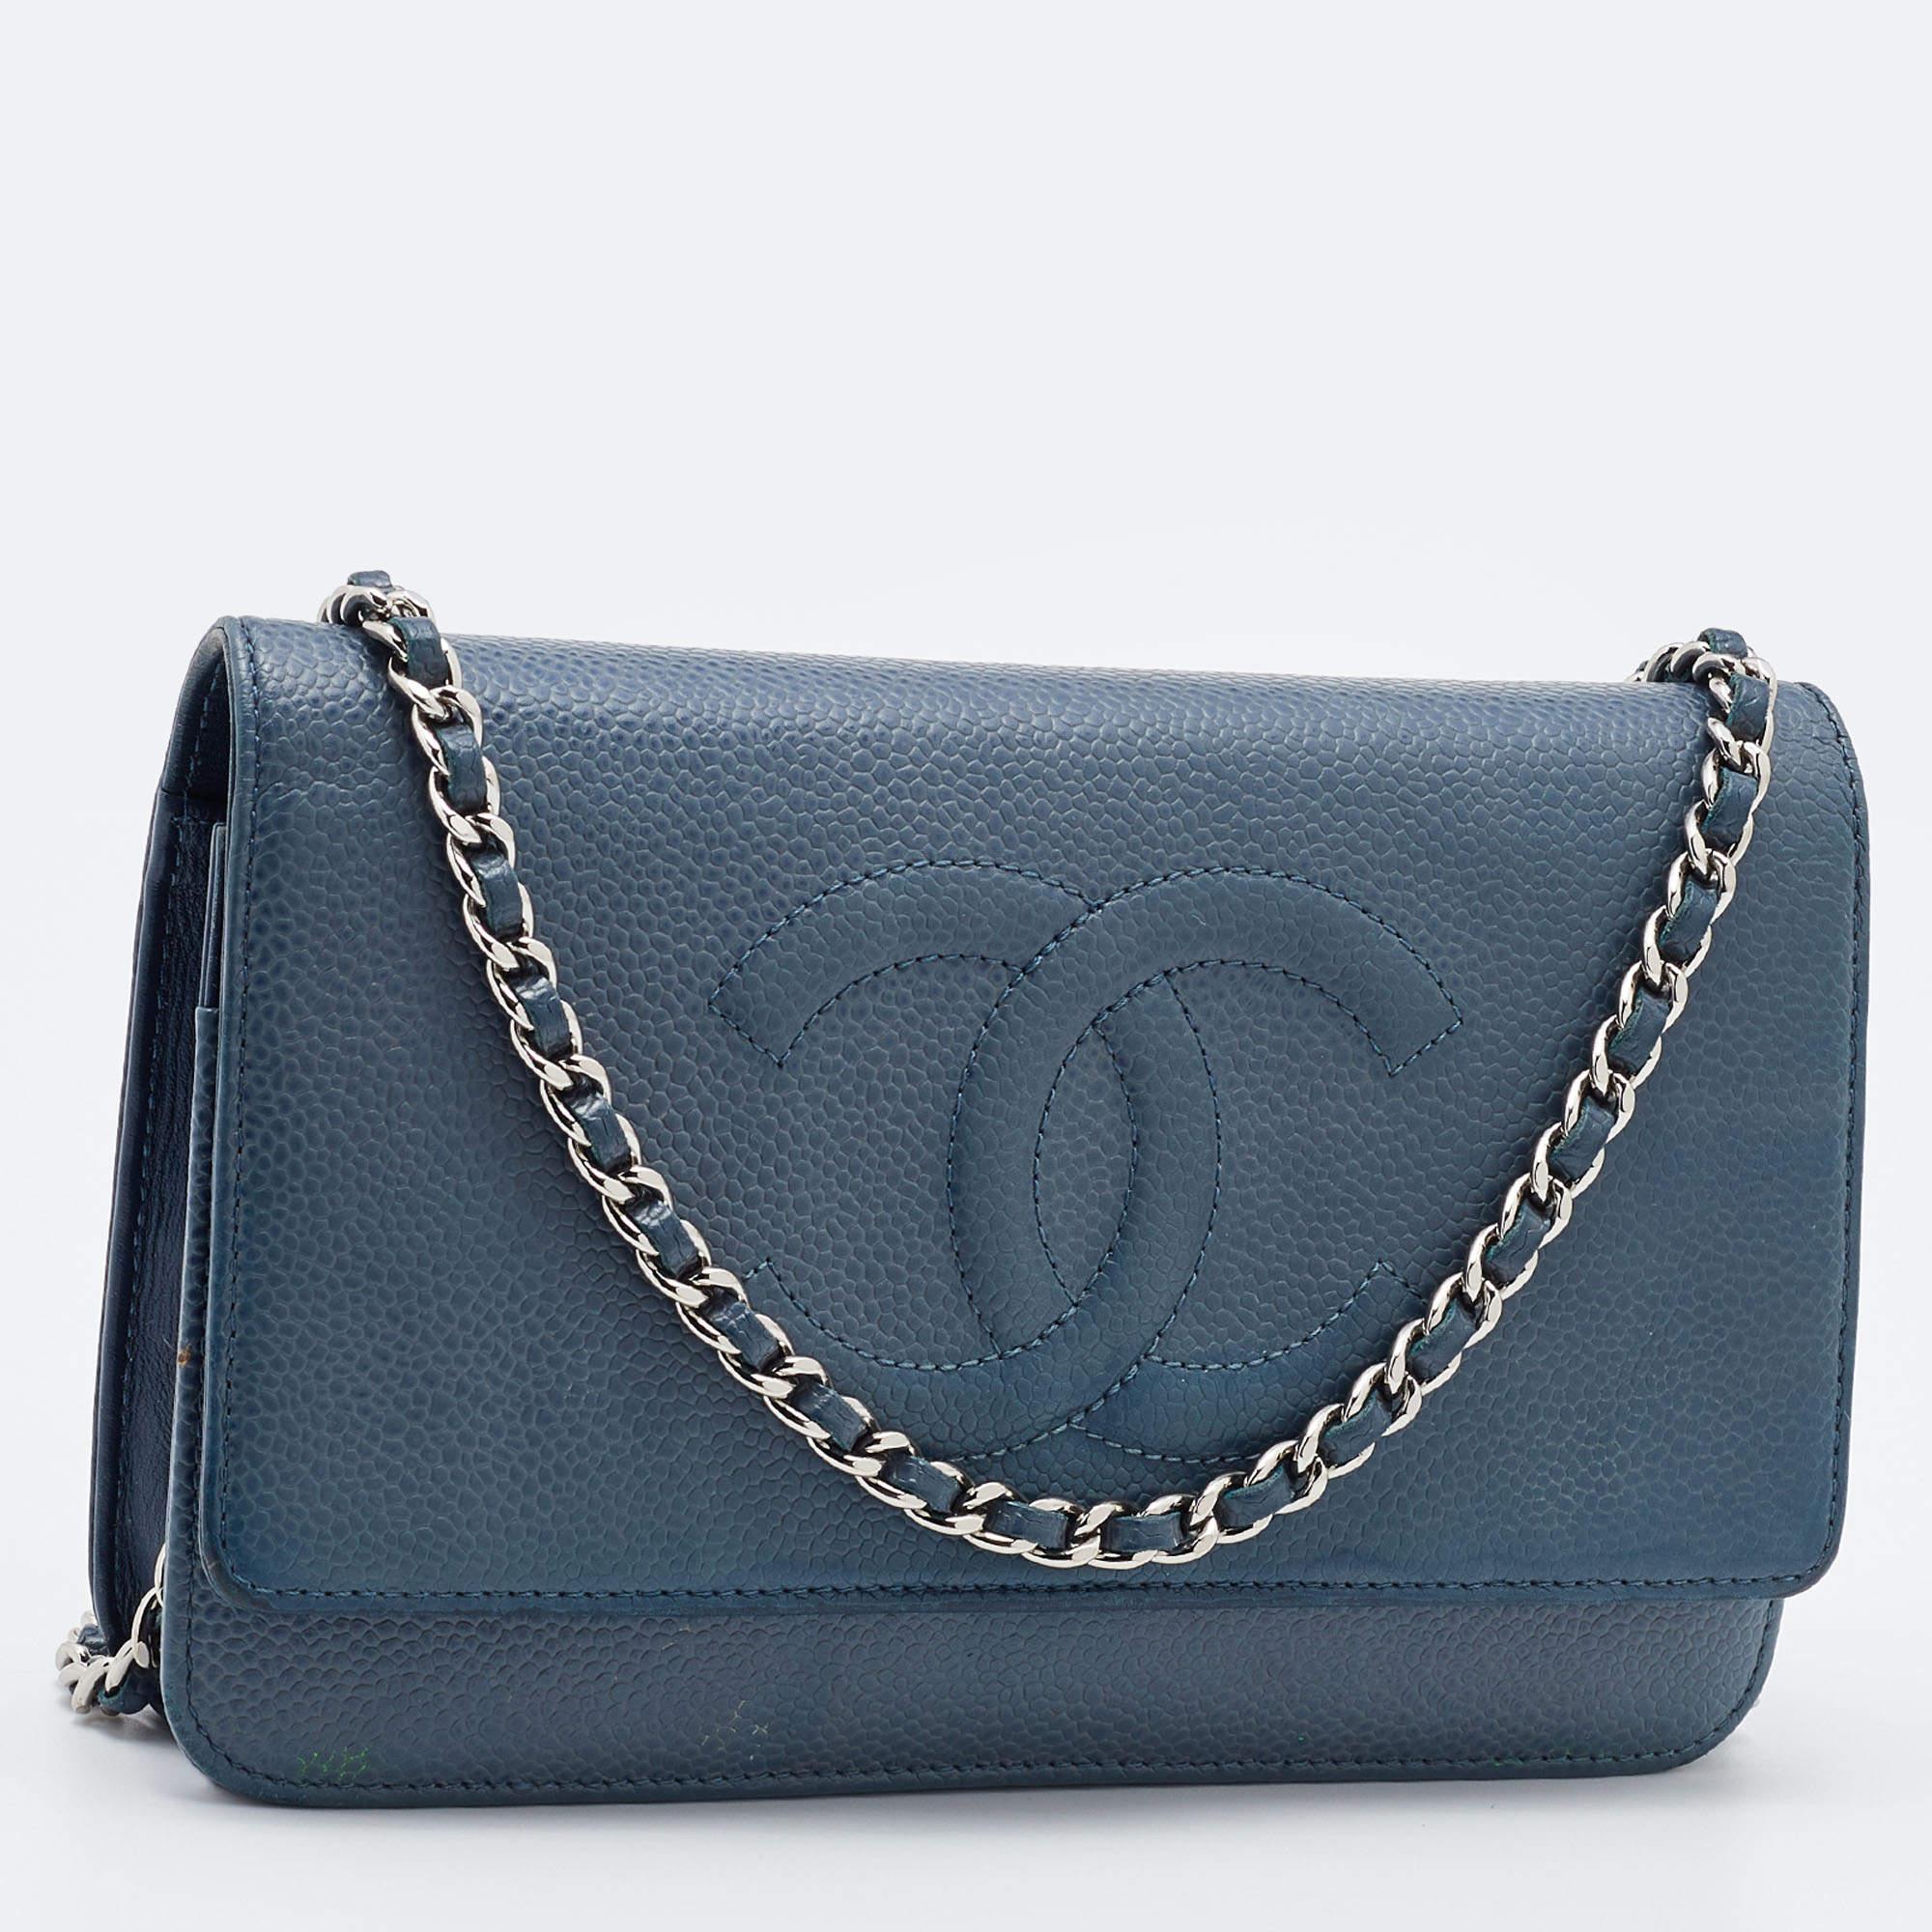 Women's Chanel Blue Caviar Leather Wallet On Chain